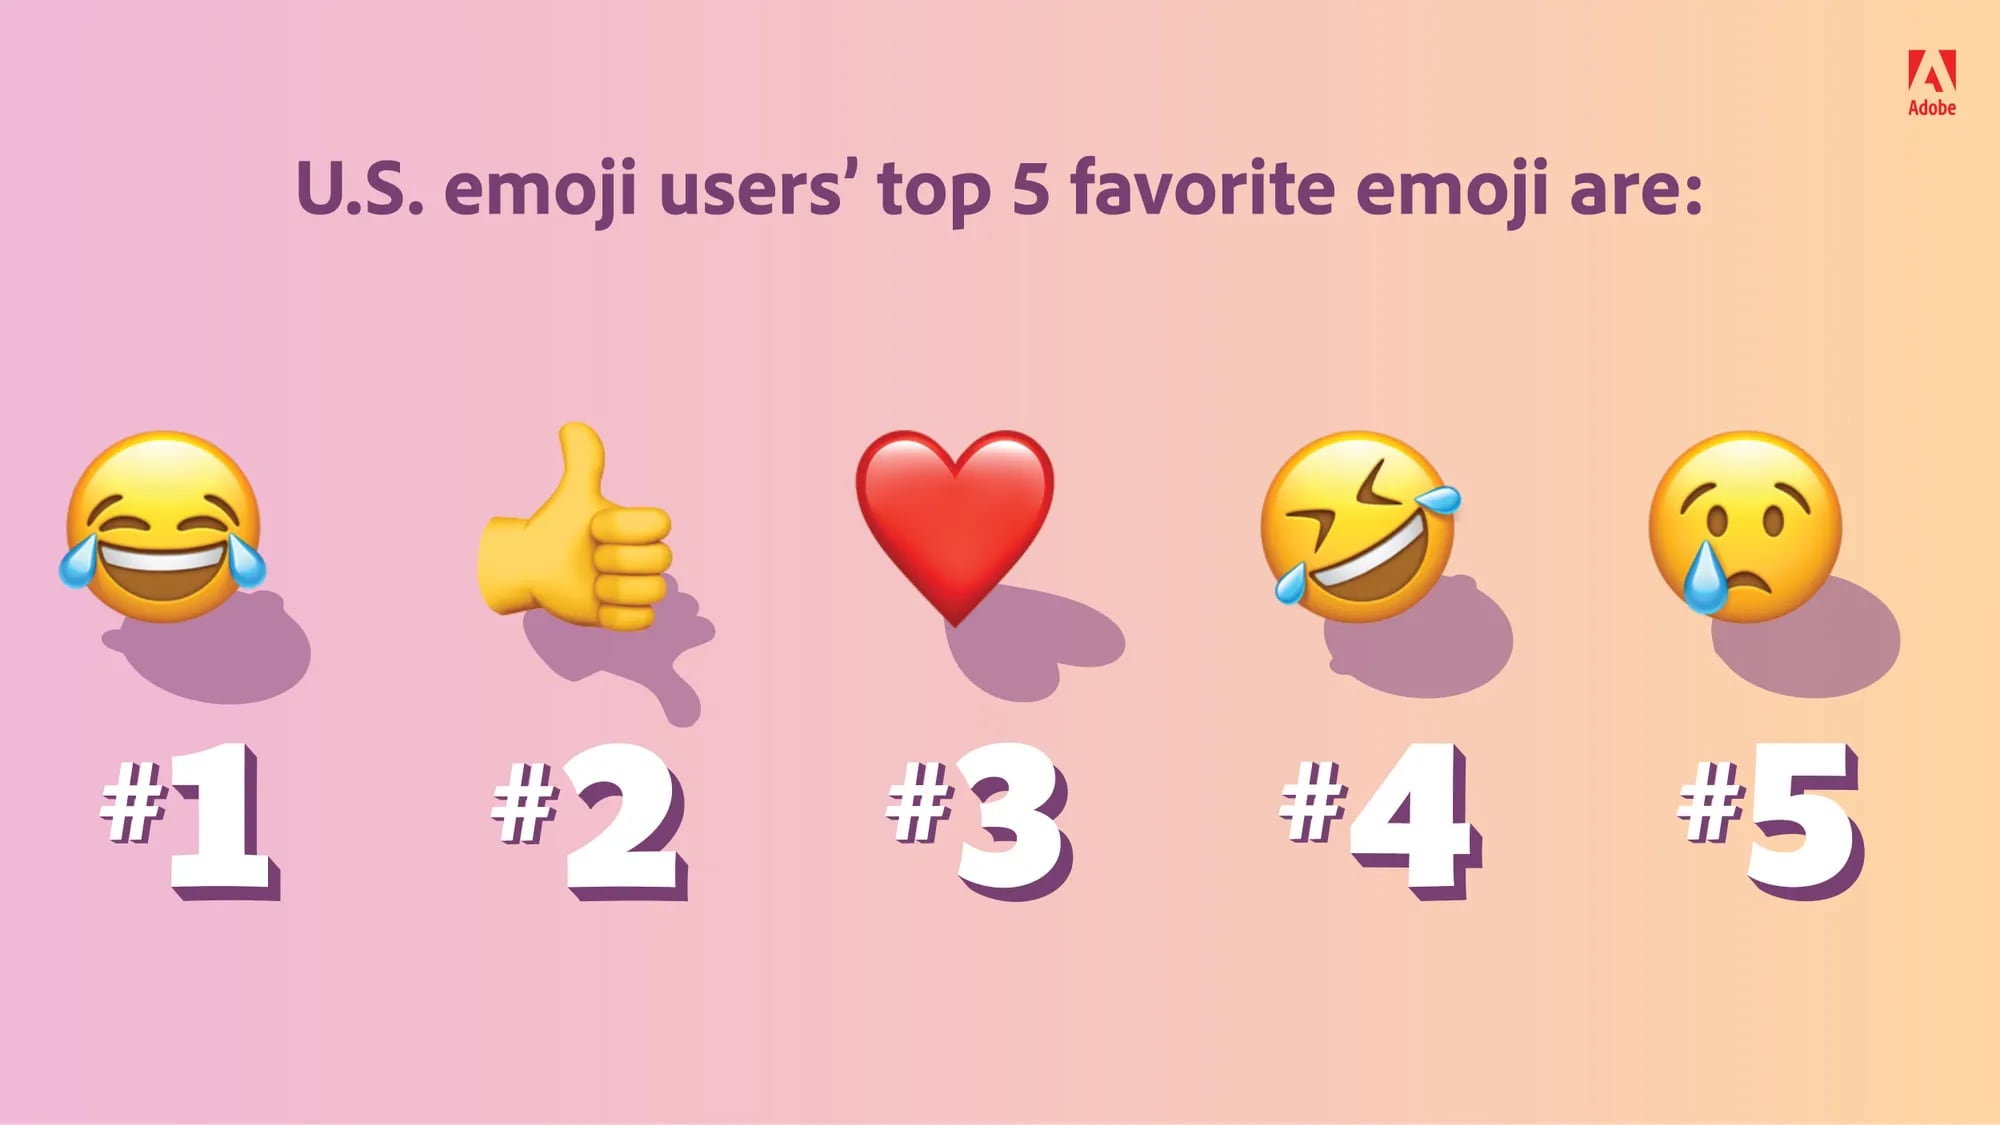 Top Five Favorite Emoji in the United States Are 😂, 👍, ❤️, 🤣, and 😢